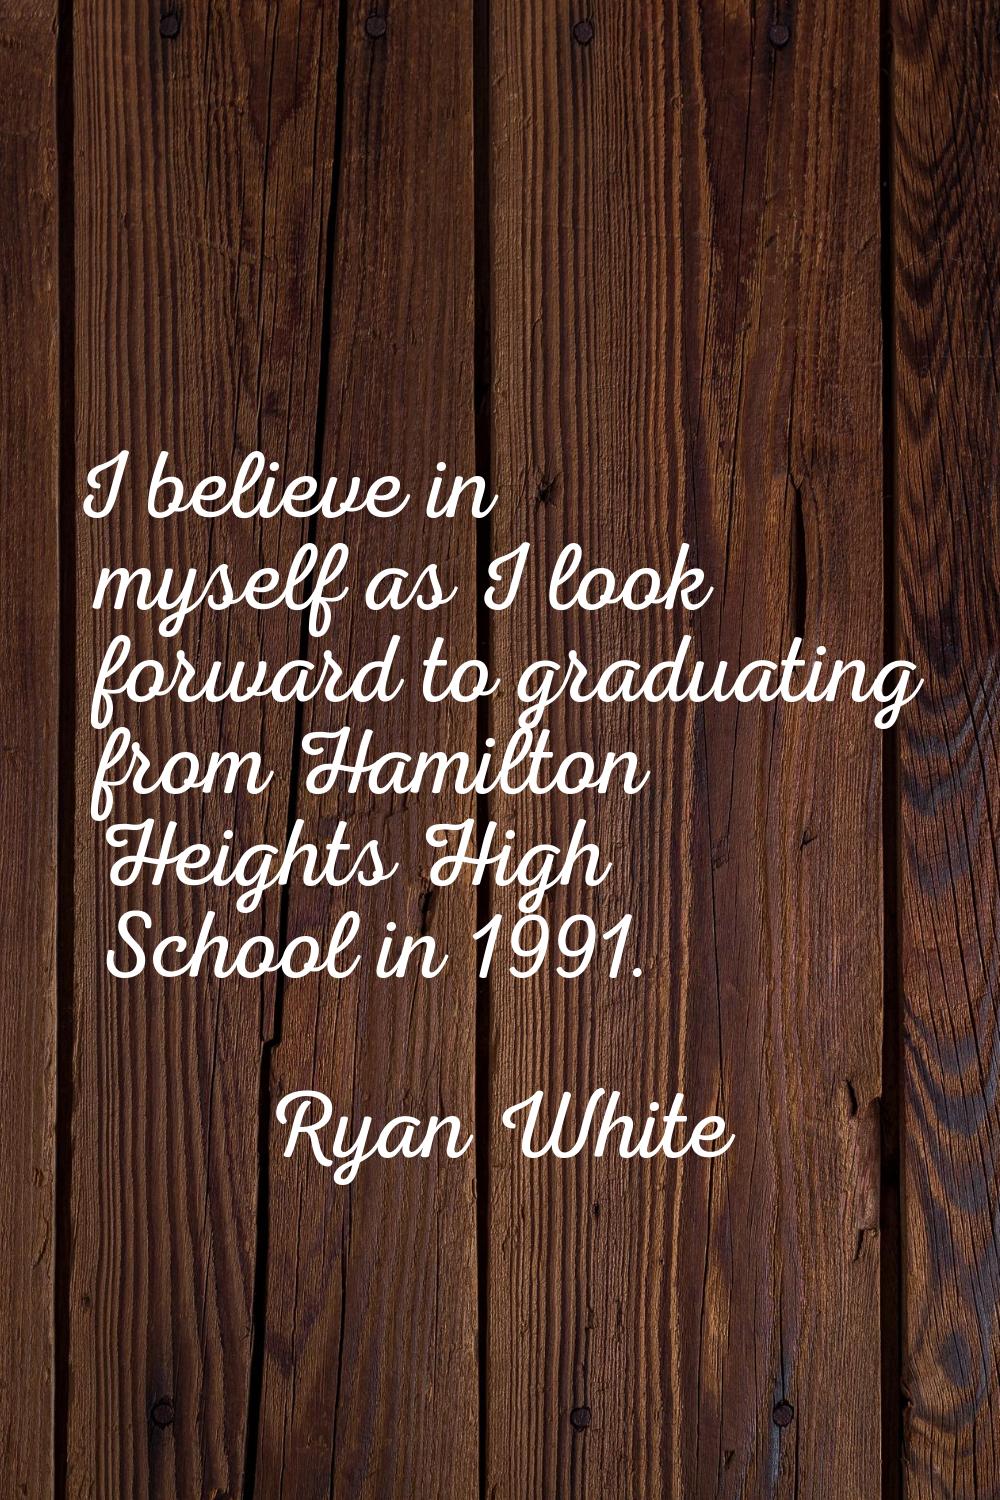 I believe in myself as I look forward to graduating from Hamilton Heights High School in 1991.